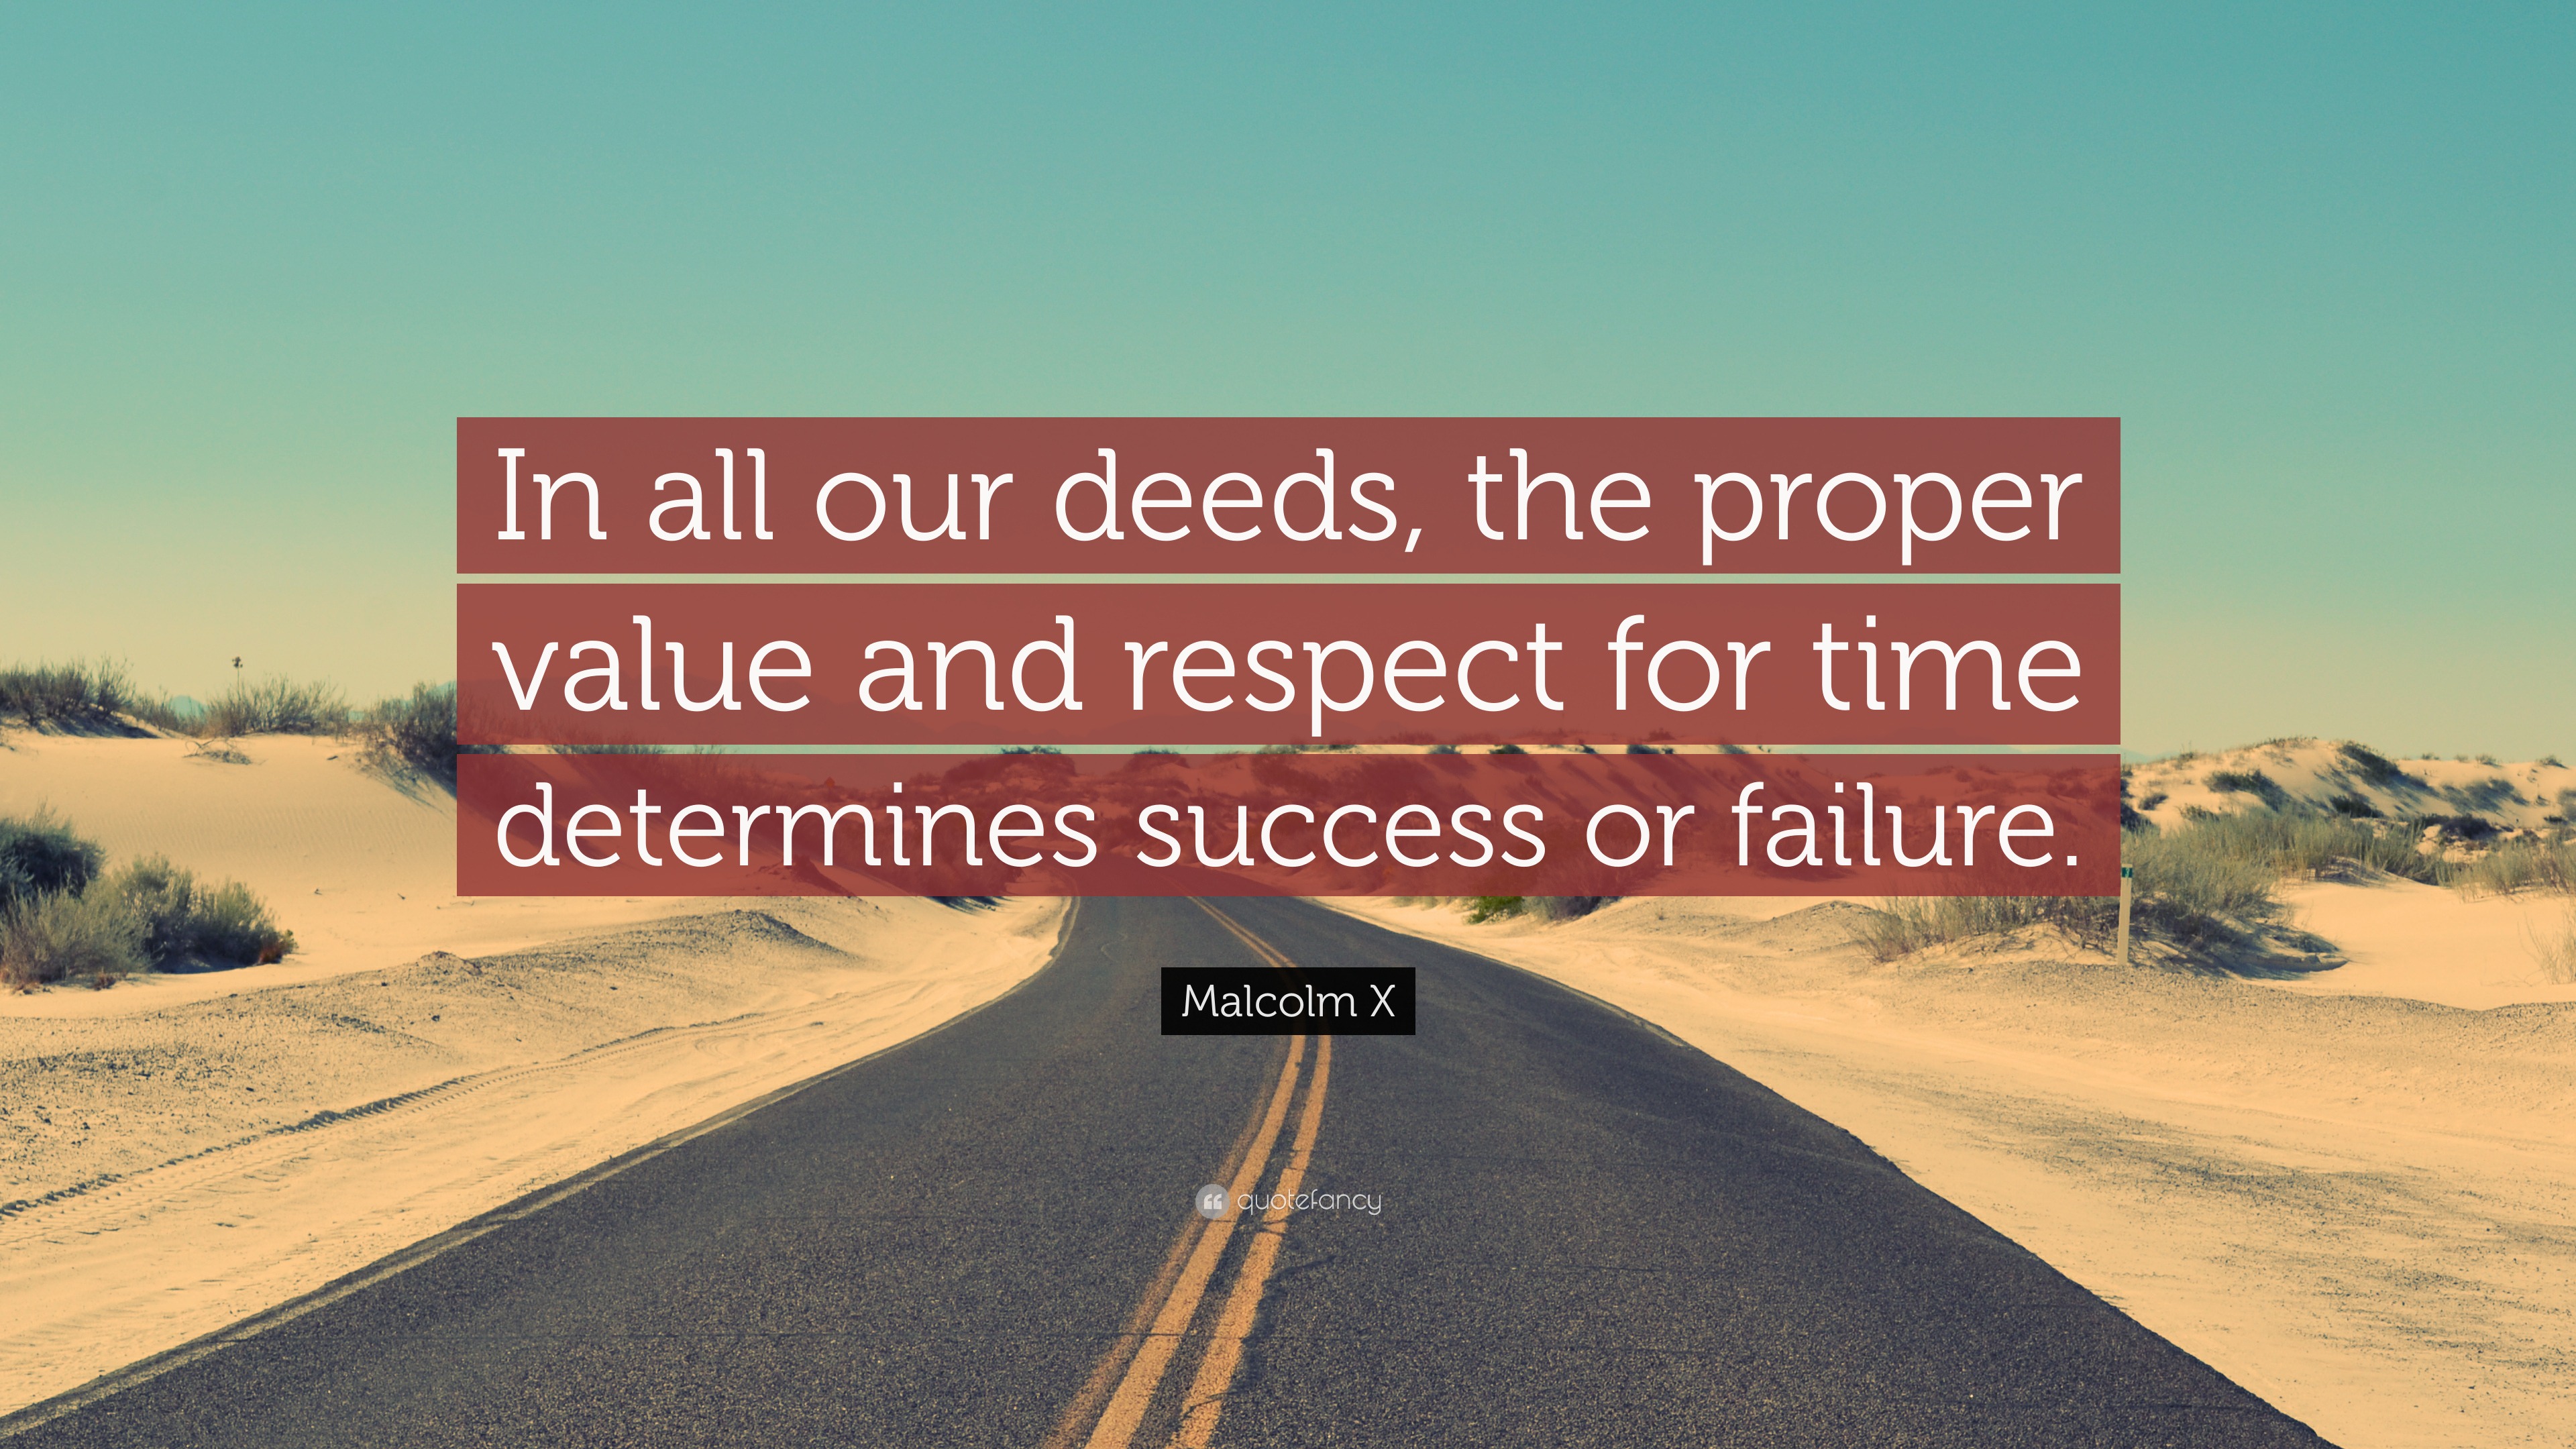 Malcolm X Quote: “In all our deeds, the proper value and respect for ...